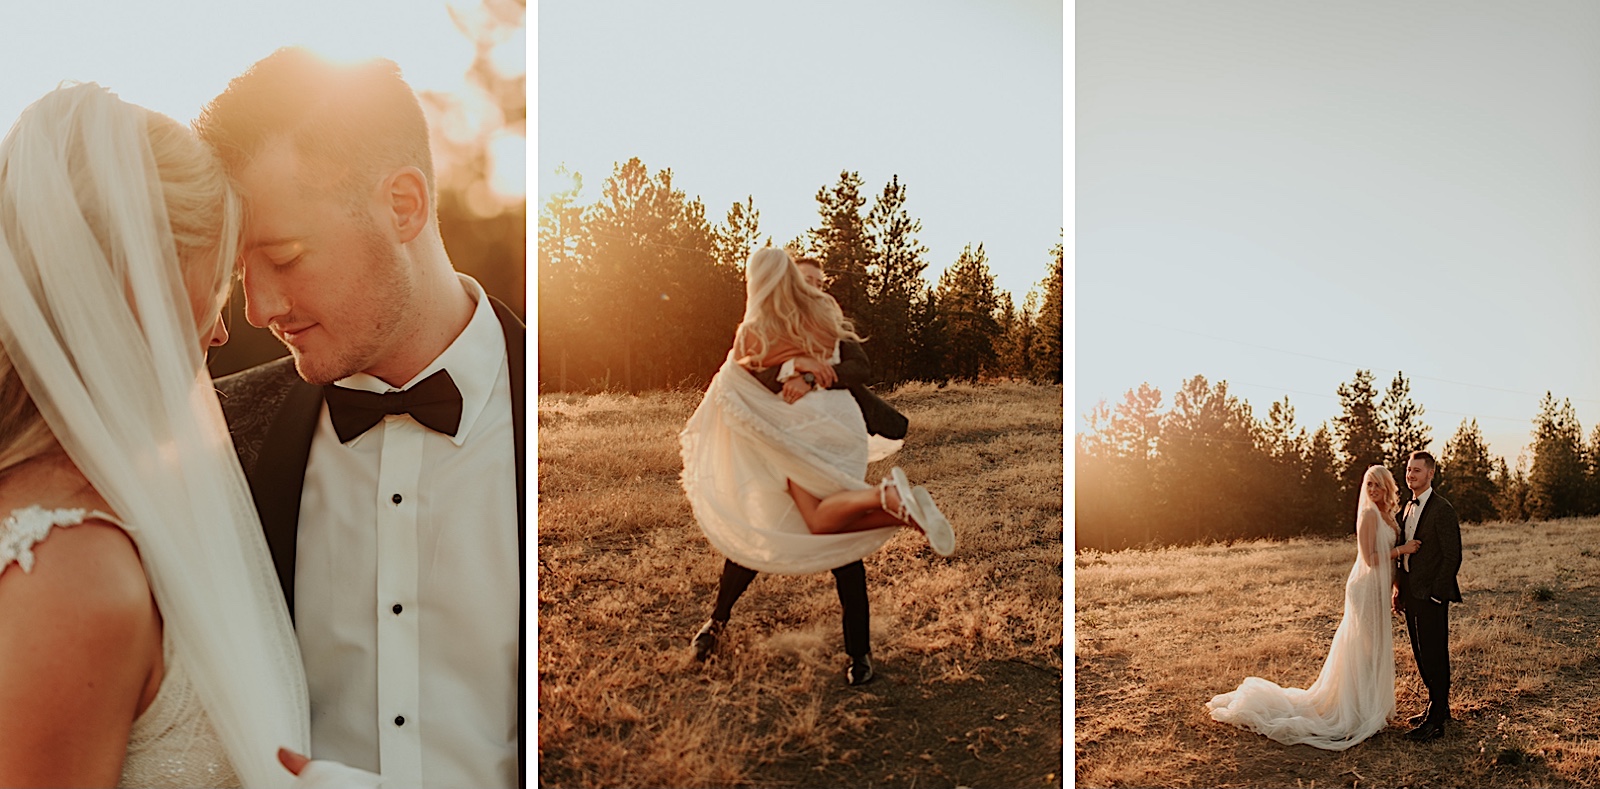 Summer Wedding at Beacon Hill in Spokane: bride and groom portraits